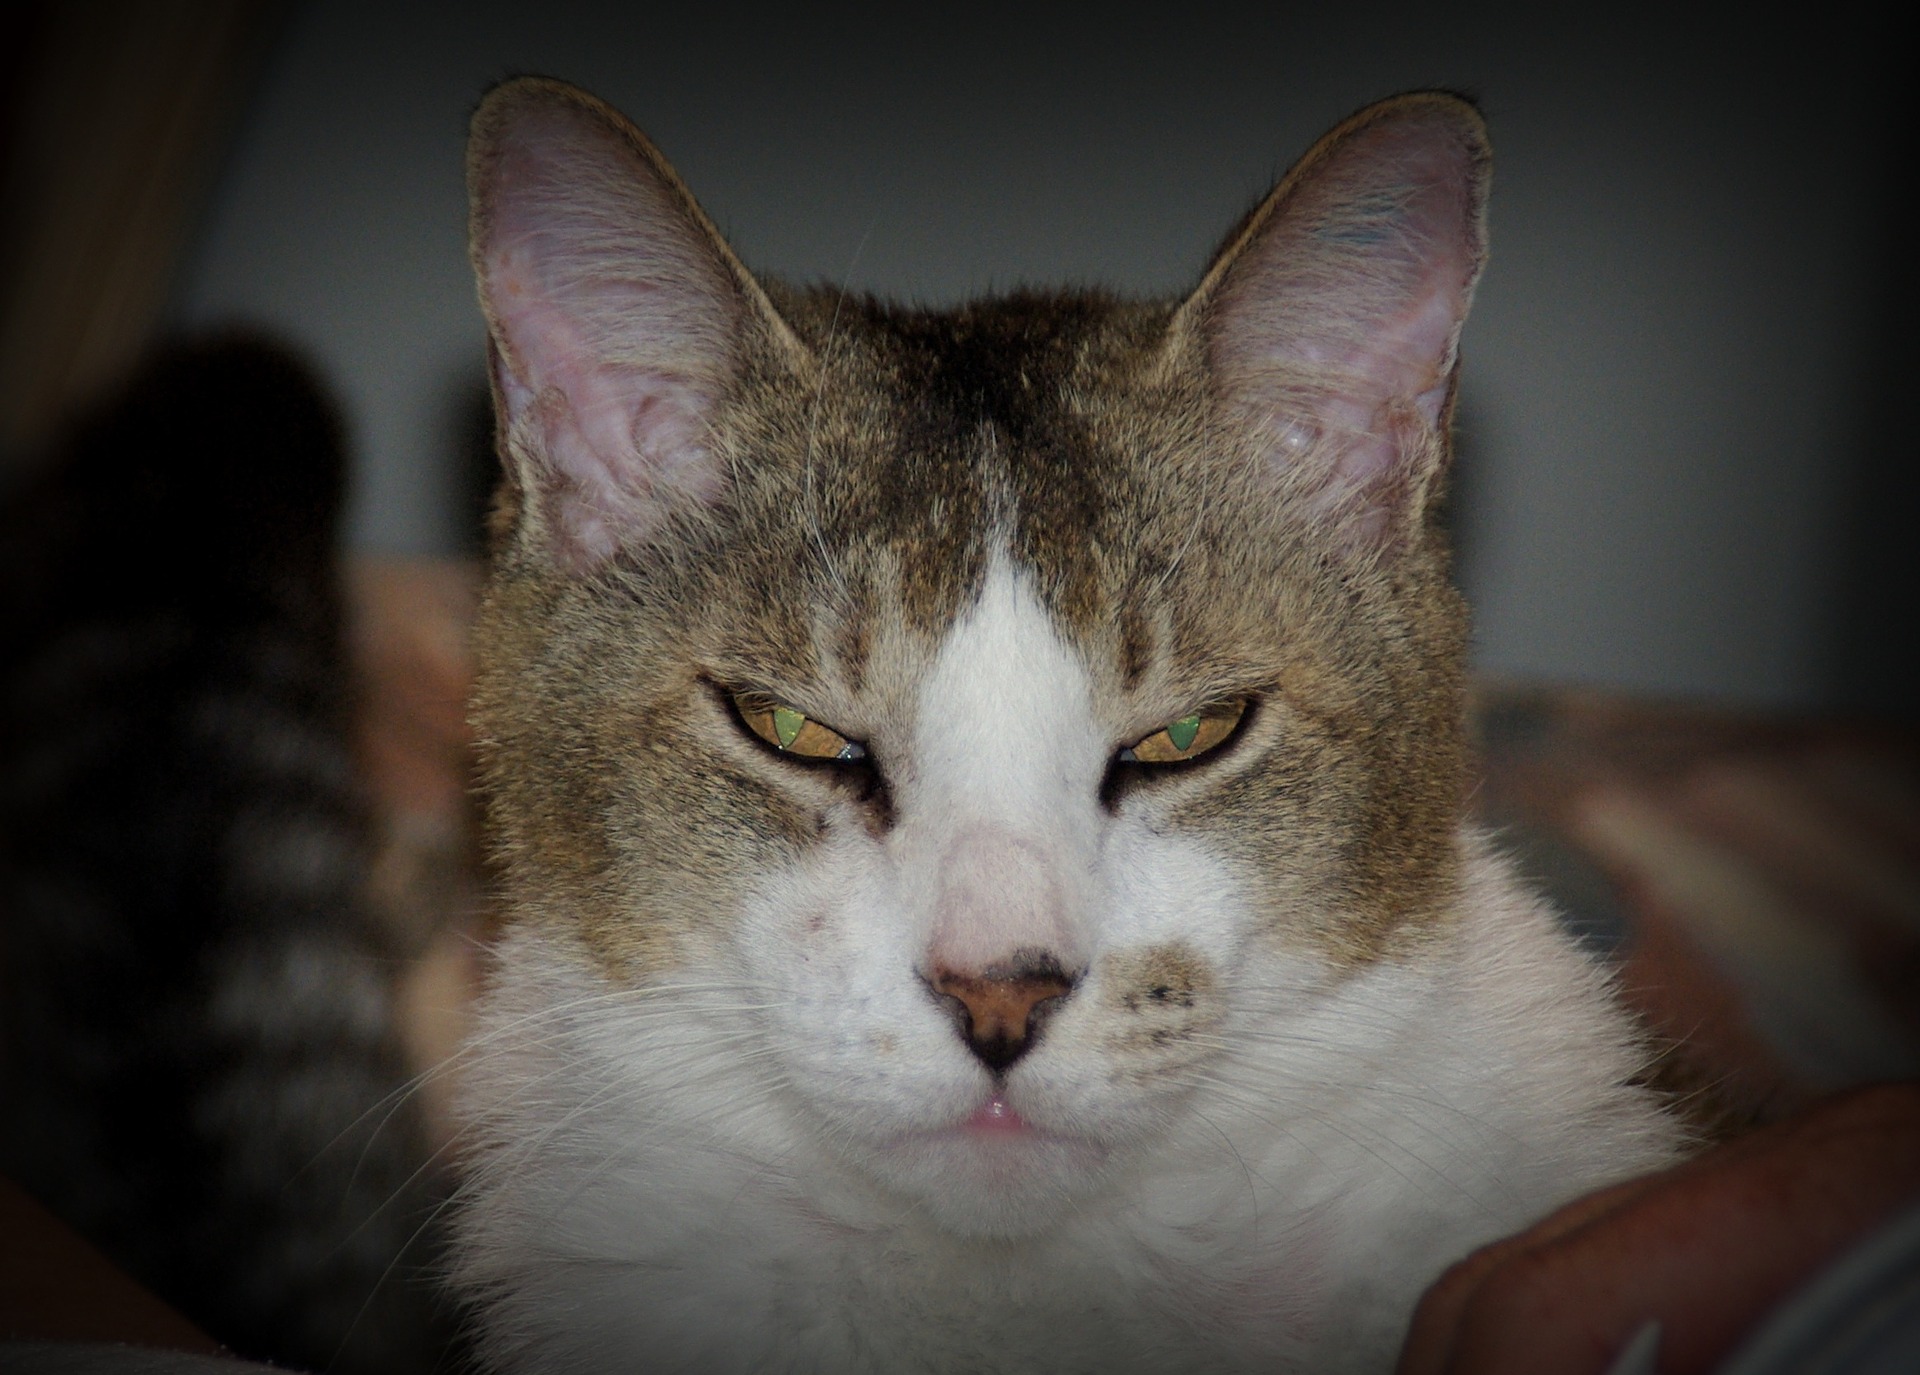 What do you do with anger? Perturbed cat